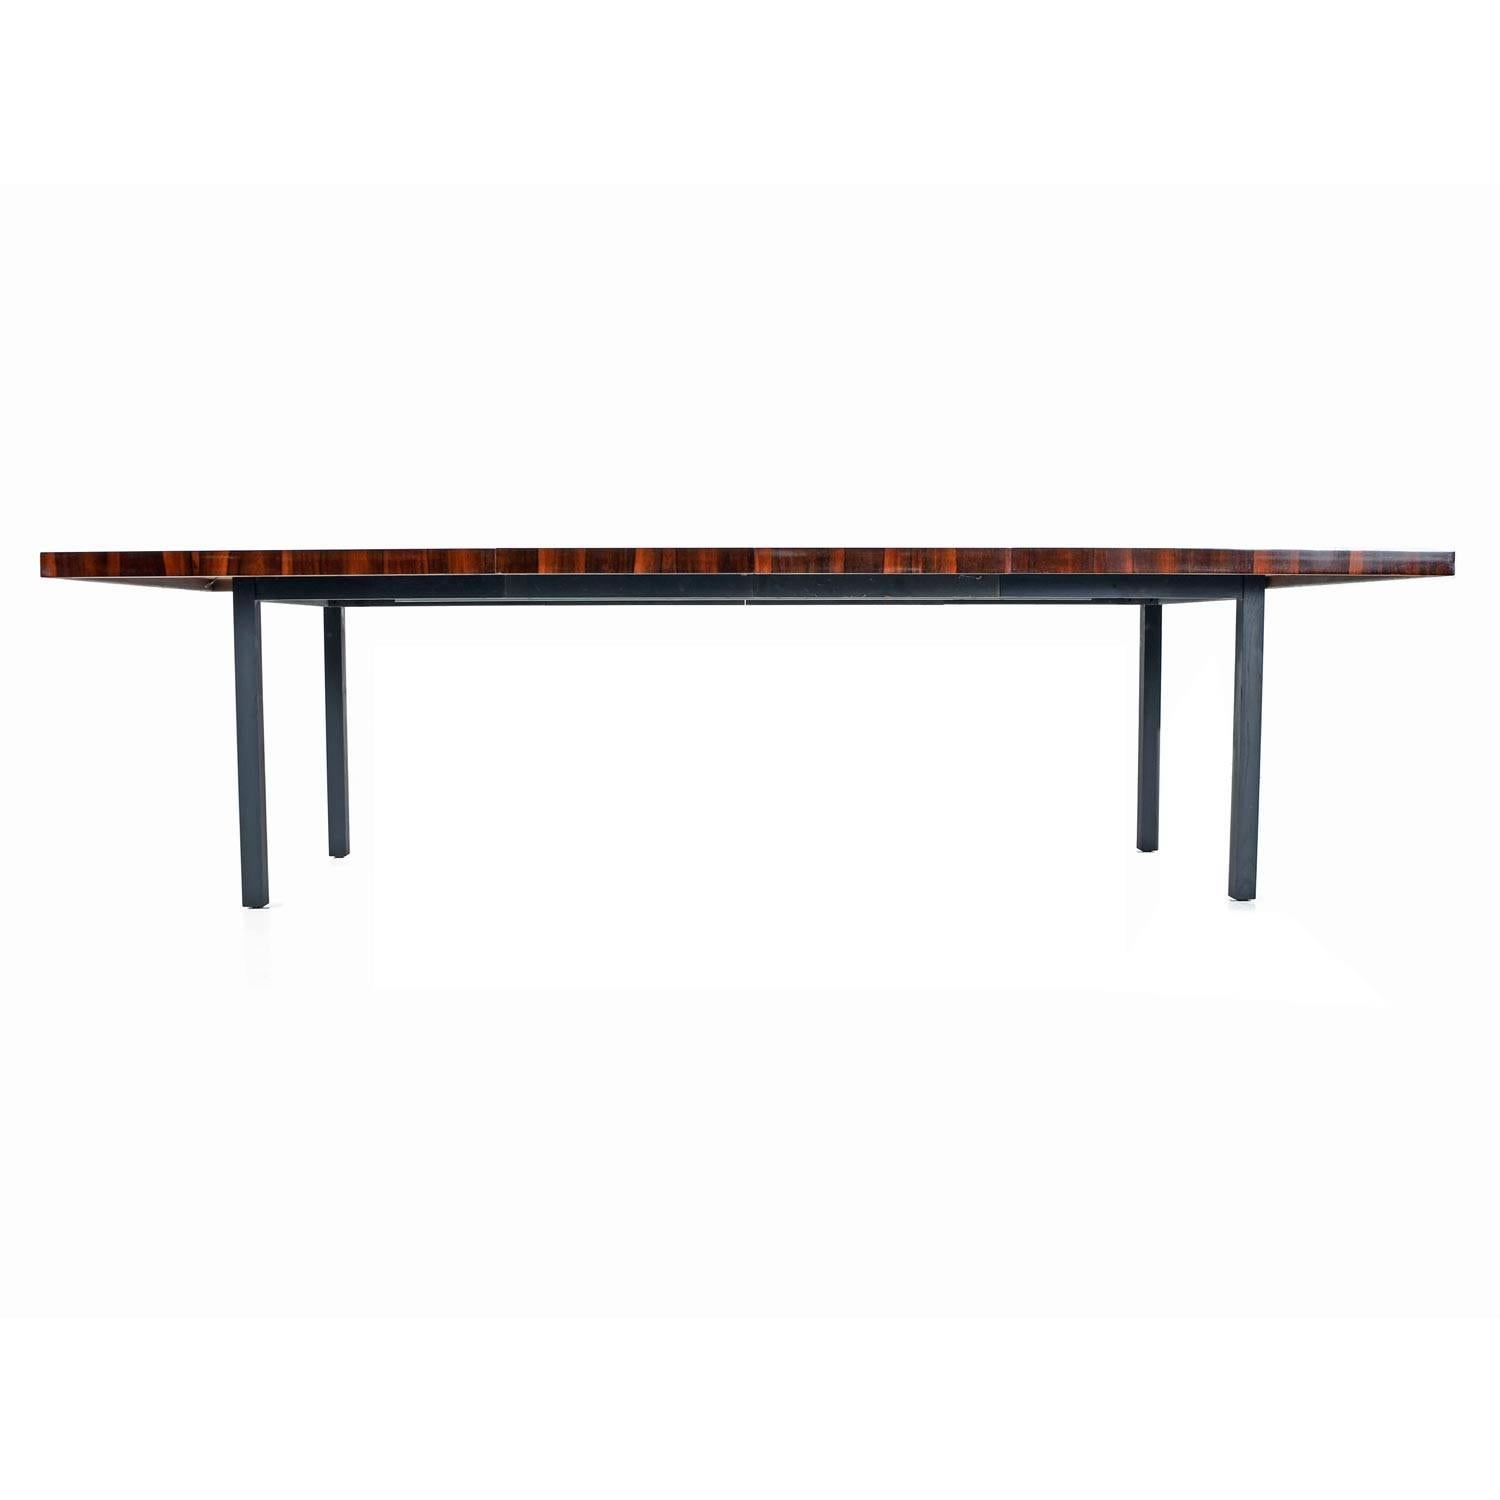 Fabulous Mid-Century Modern dining table by Milo Baughman for Dillingham. The striated designed is created by layers of rosewood, walnut and hickory veneers. The striking array of wood tones is contrasted by flat black ebony stained legs. Table